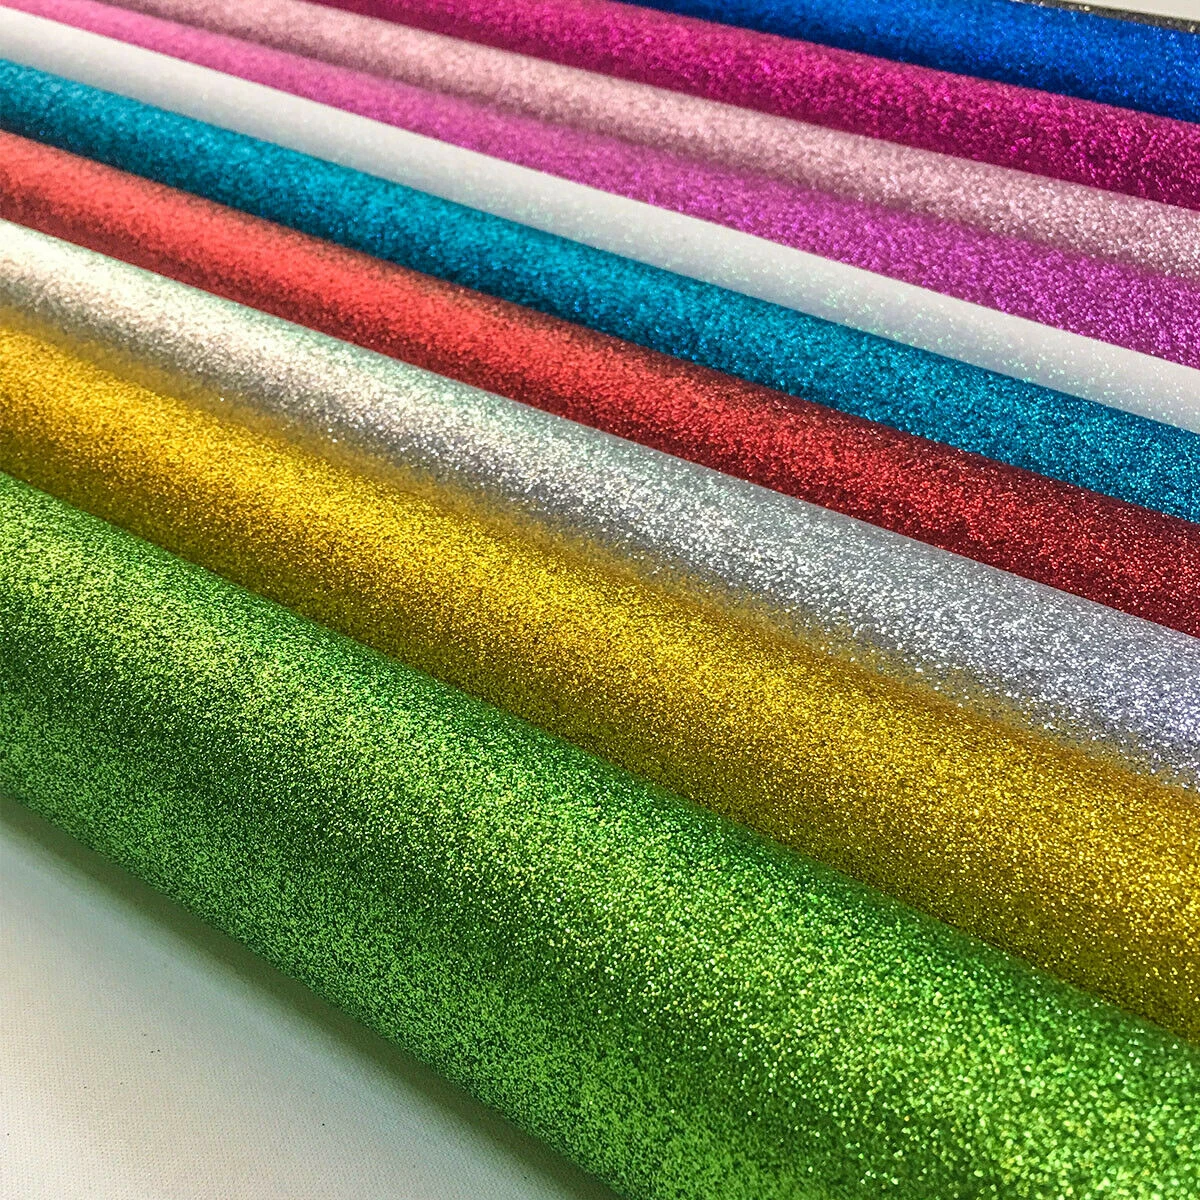 Fine Glitter Fabric Roll iridescent Sparkle Faux Leather Craft Material Bows Bag Decor DIY Sewing Making Sheets